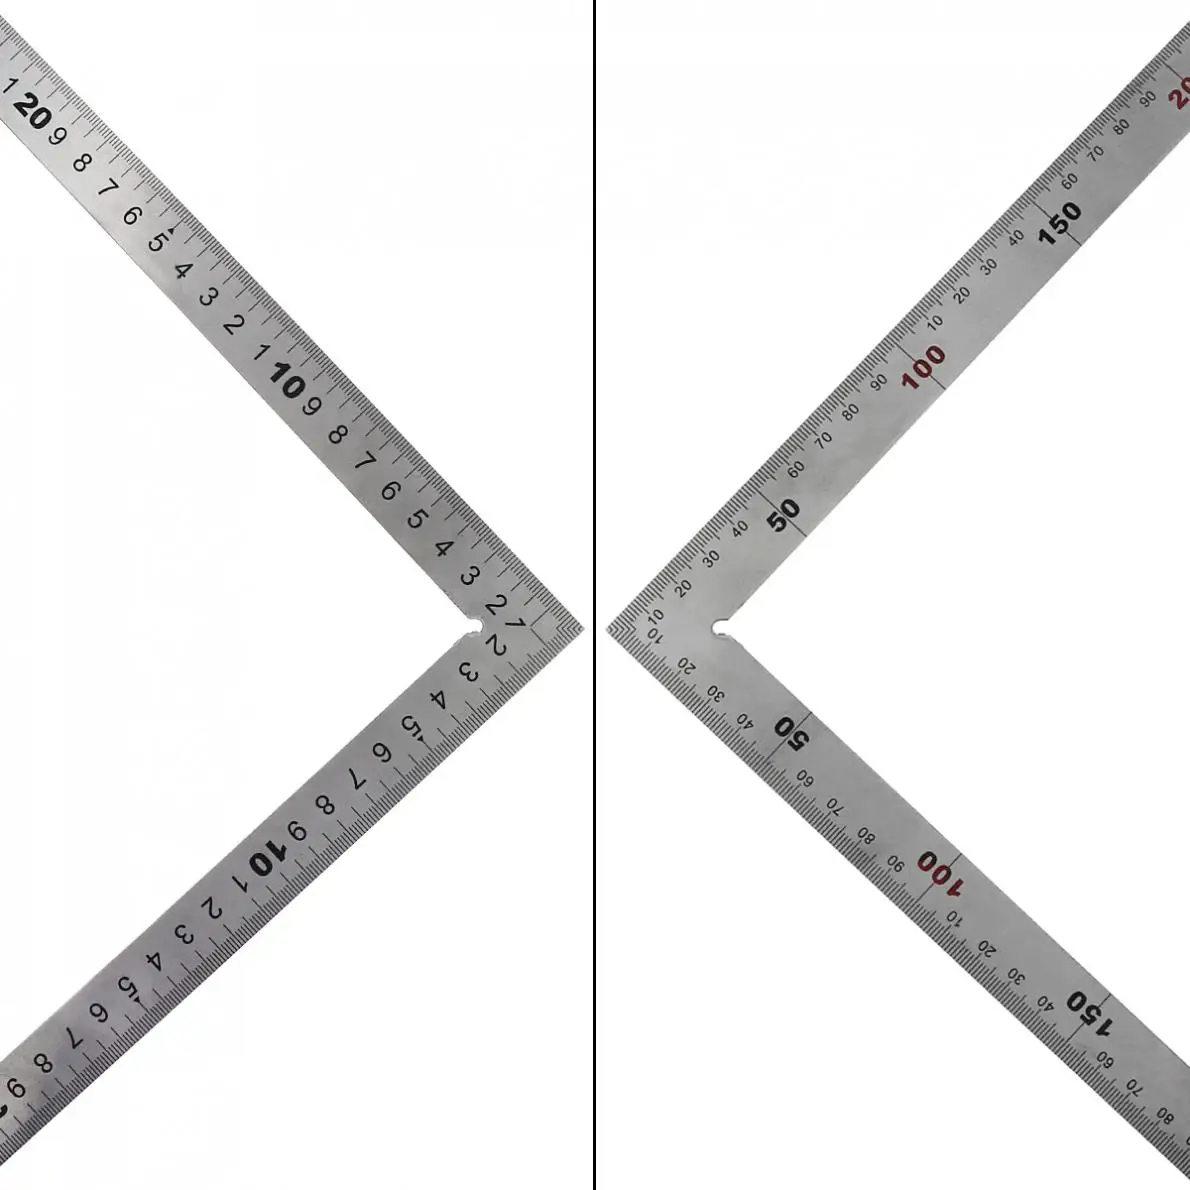 Portable 250 x 500mm Thicker 1.2mm Stainless Steel 90 Degree Right Angle Ruler for Woodworking / Office